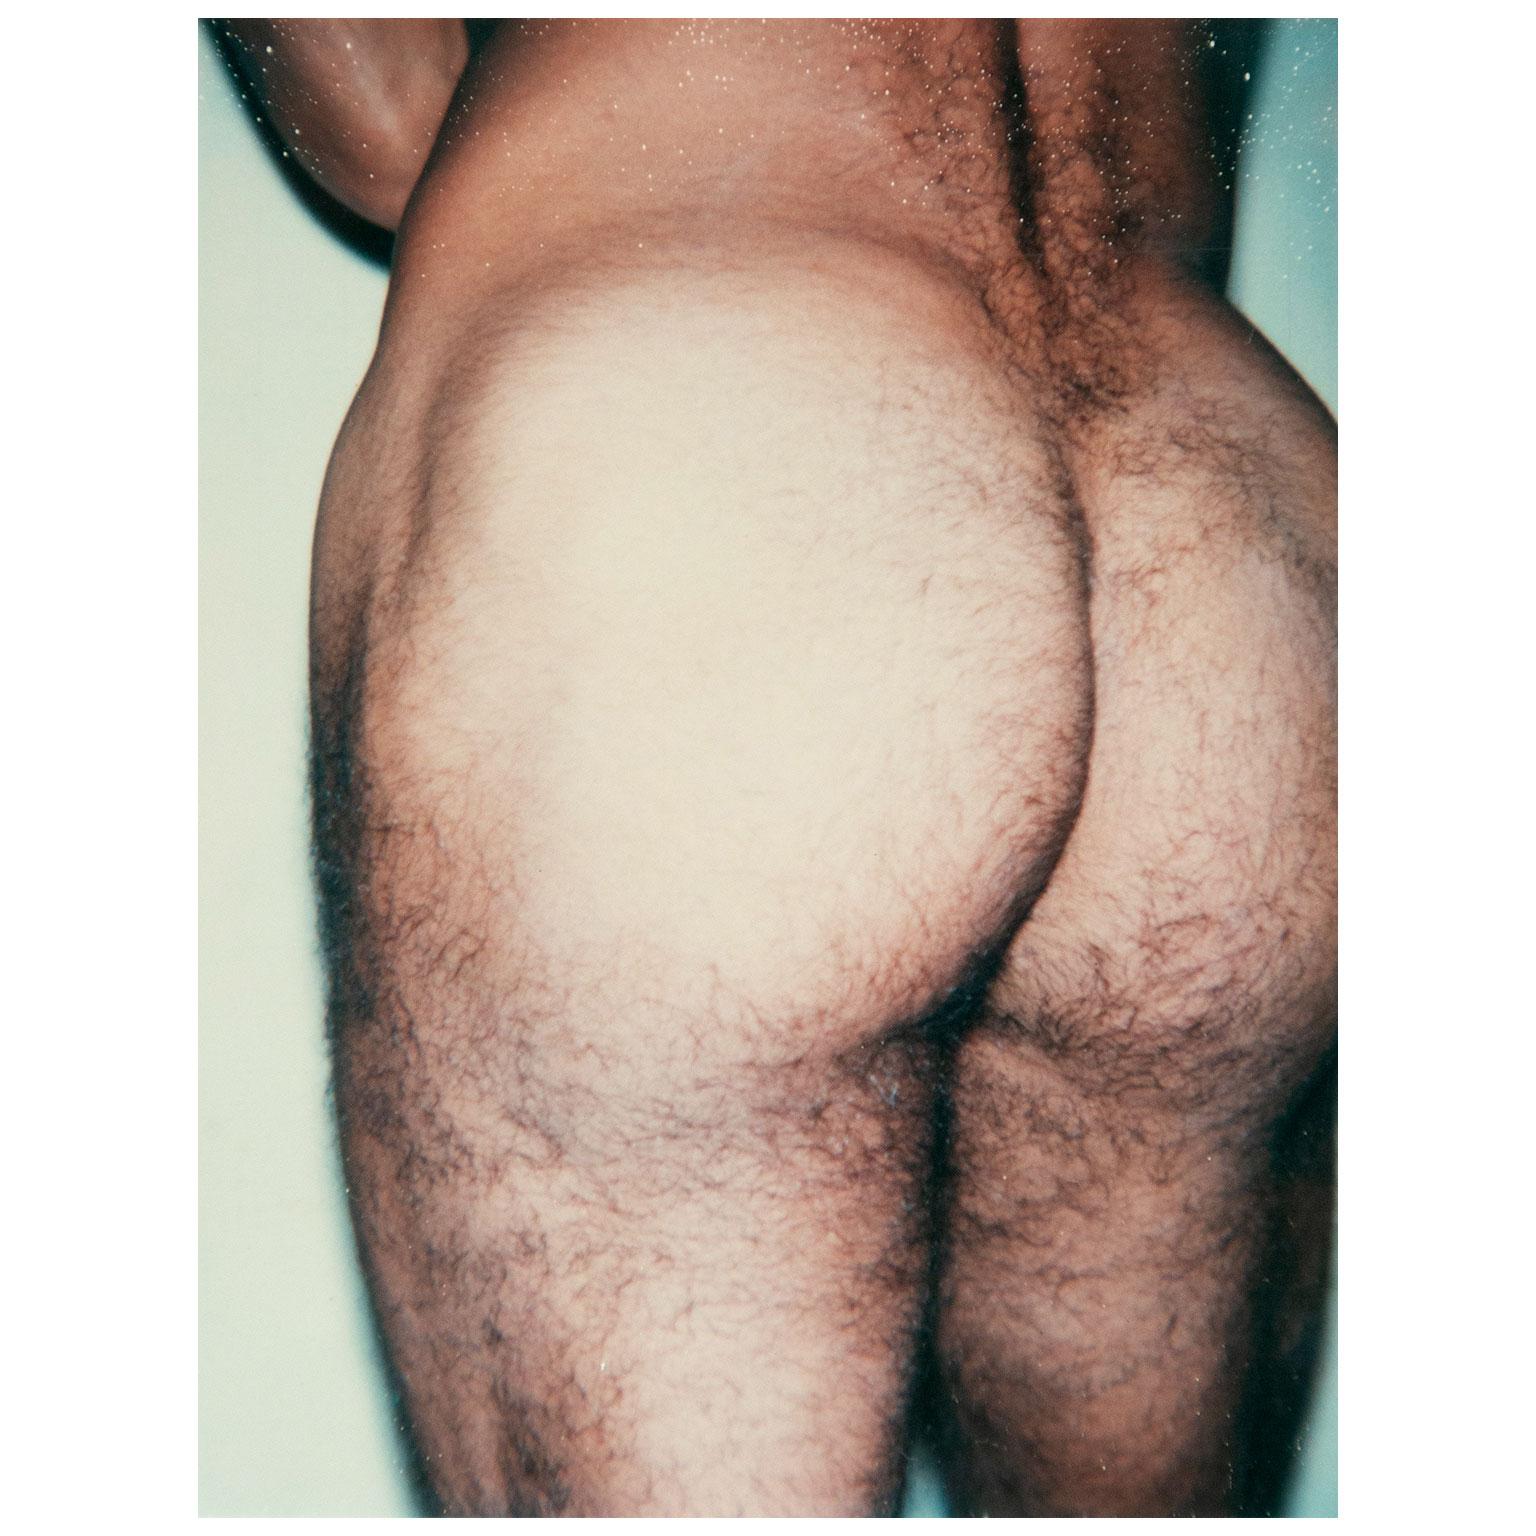 Butt - H - Photograph by Andy Warhol